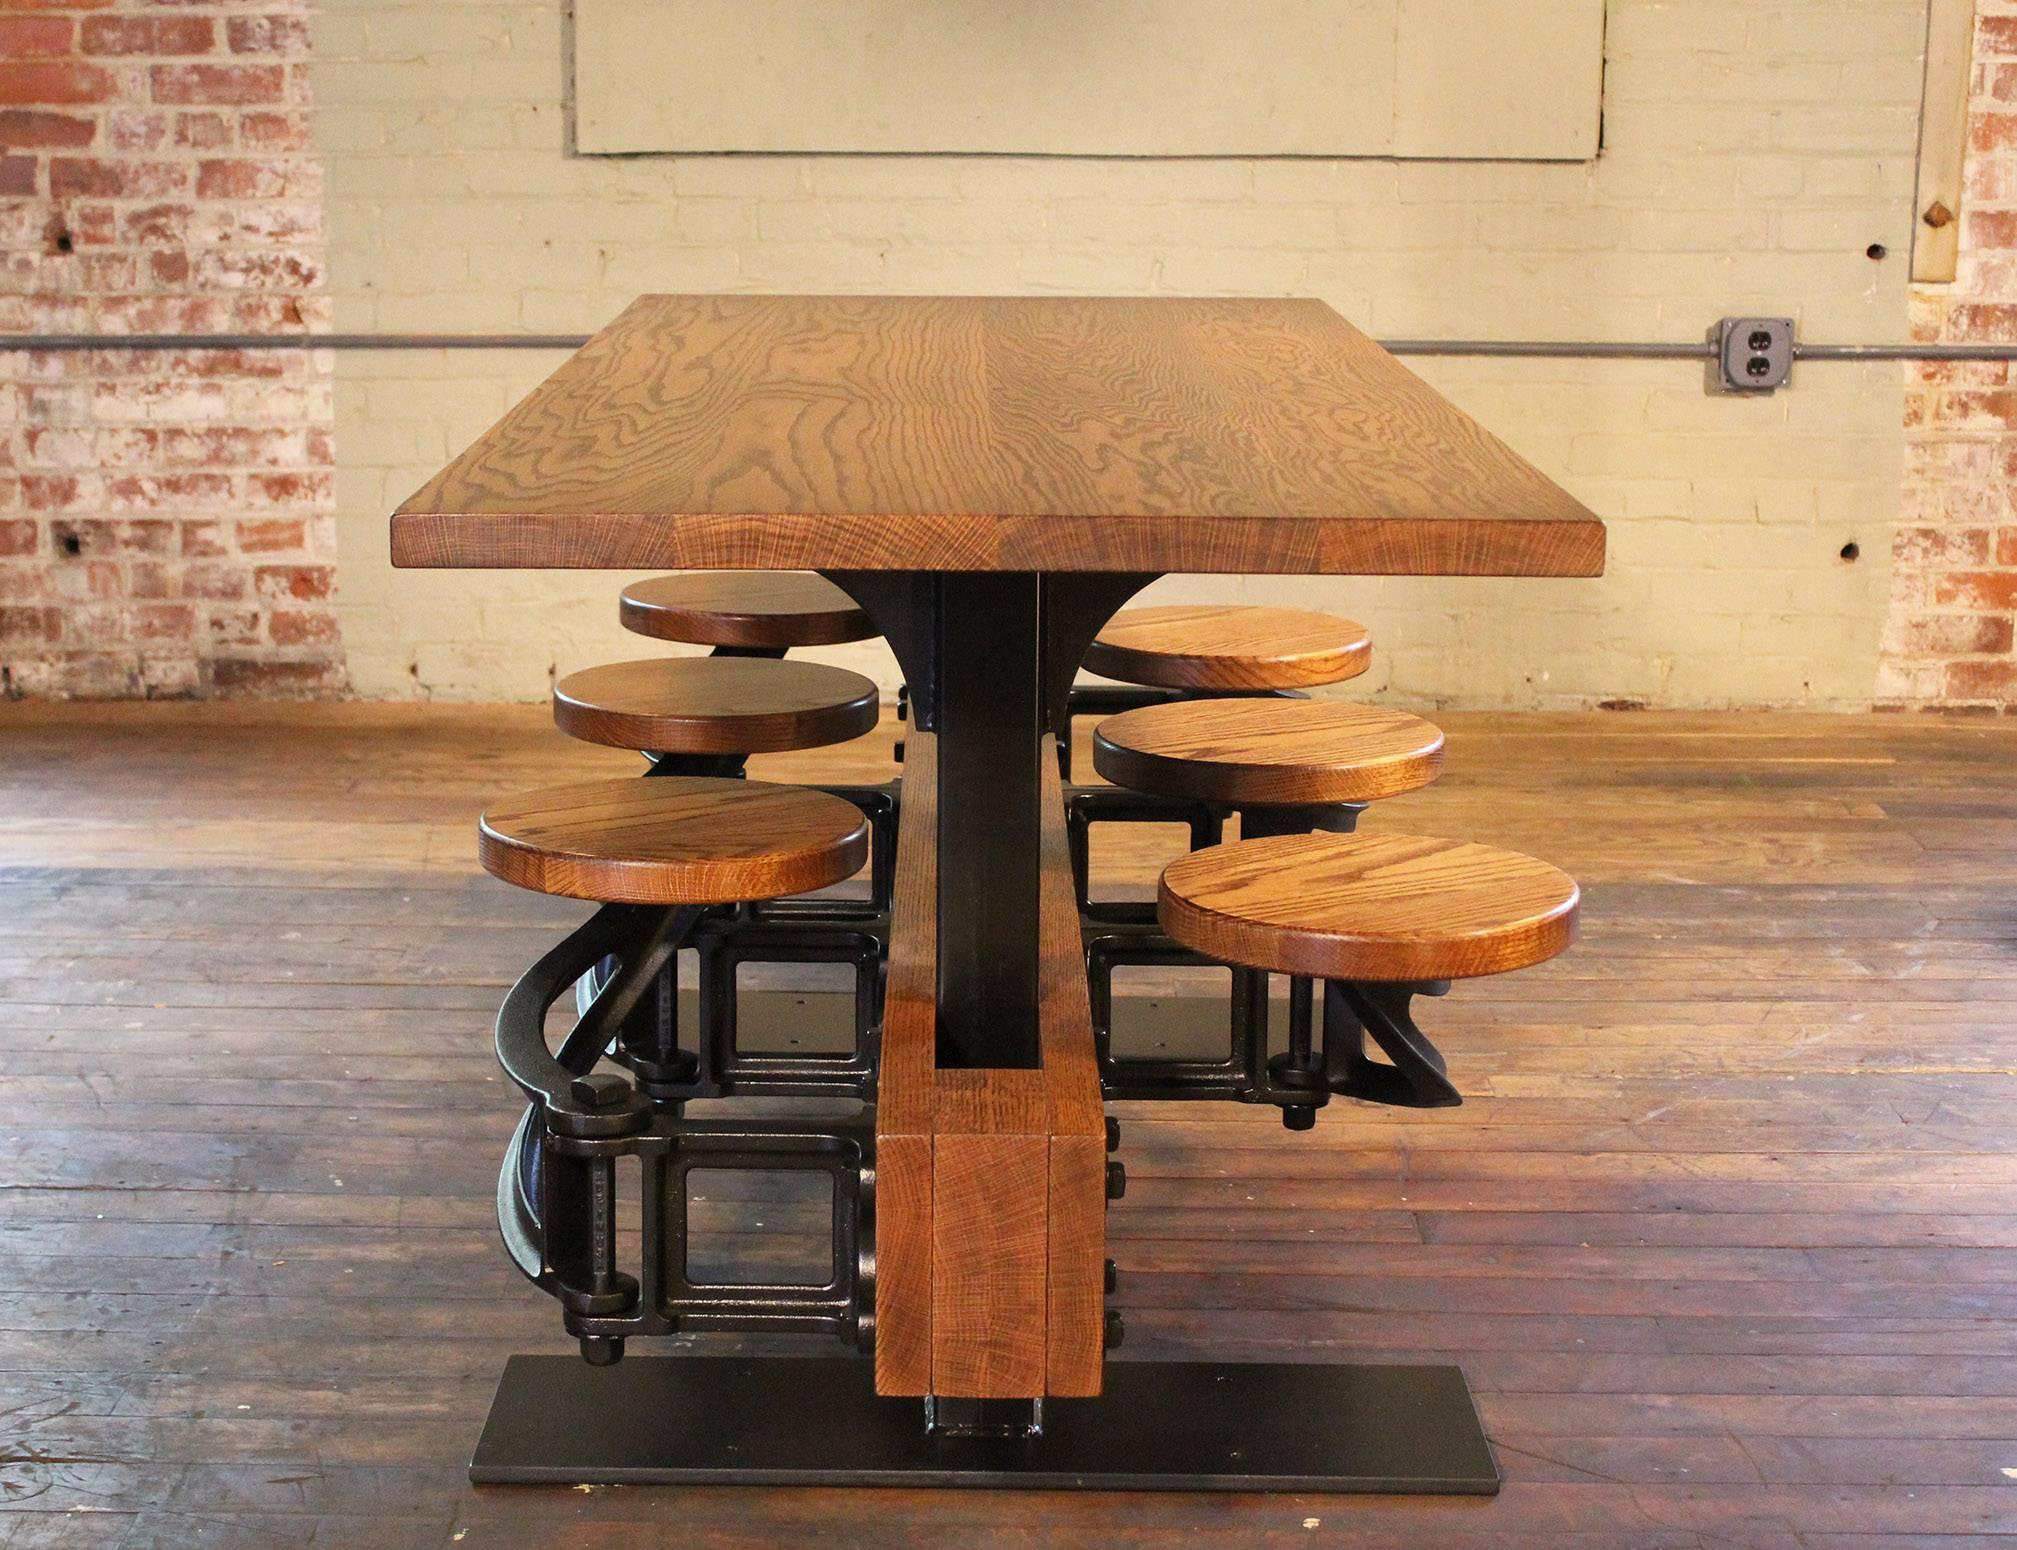 Vintage Industrial Mid-Century Modern style oak dining kitchen, breakfast table with built in attached cast iron swing out seats, chairs. Kitchen or breakfast table, cafe, cafeteria use. Can be made with different types of wood, or metal, glass top,